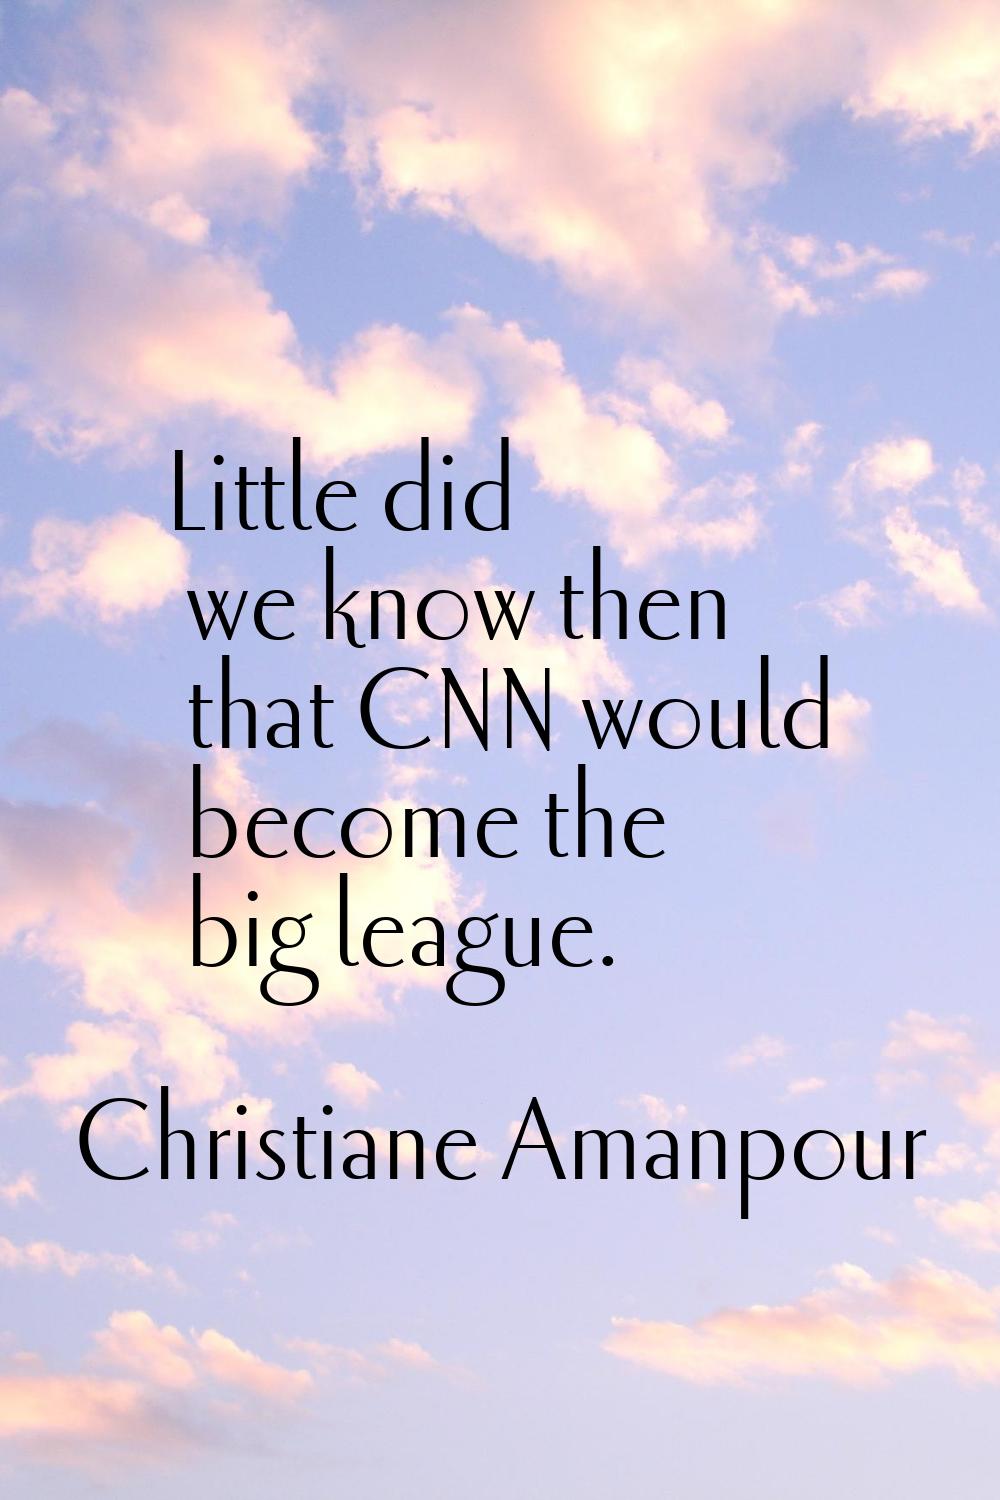 Little did we know then that CNN would become the big league.